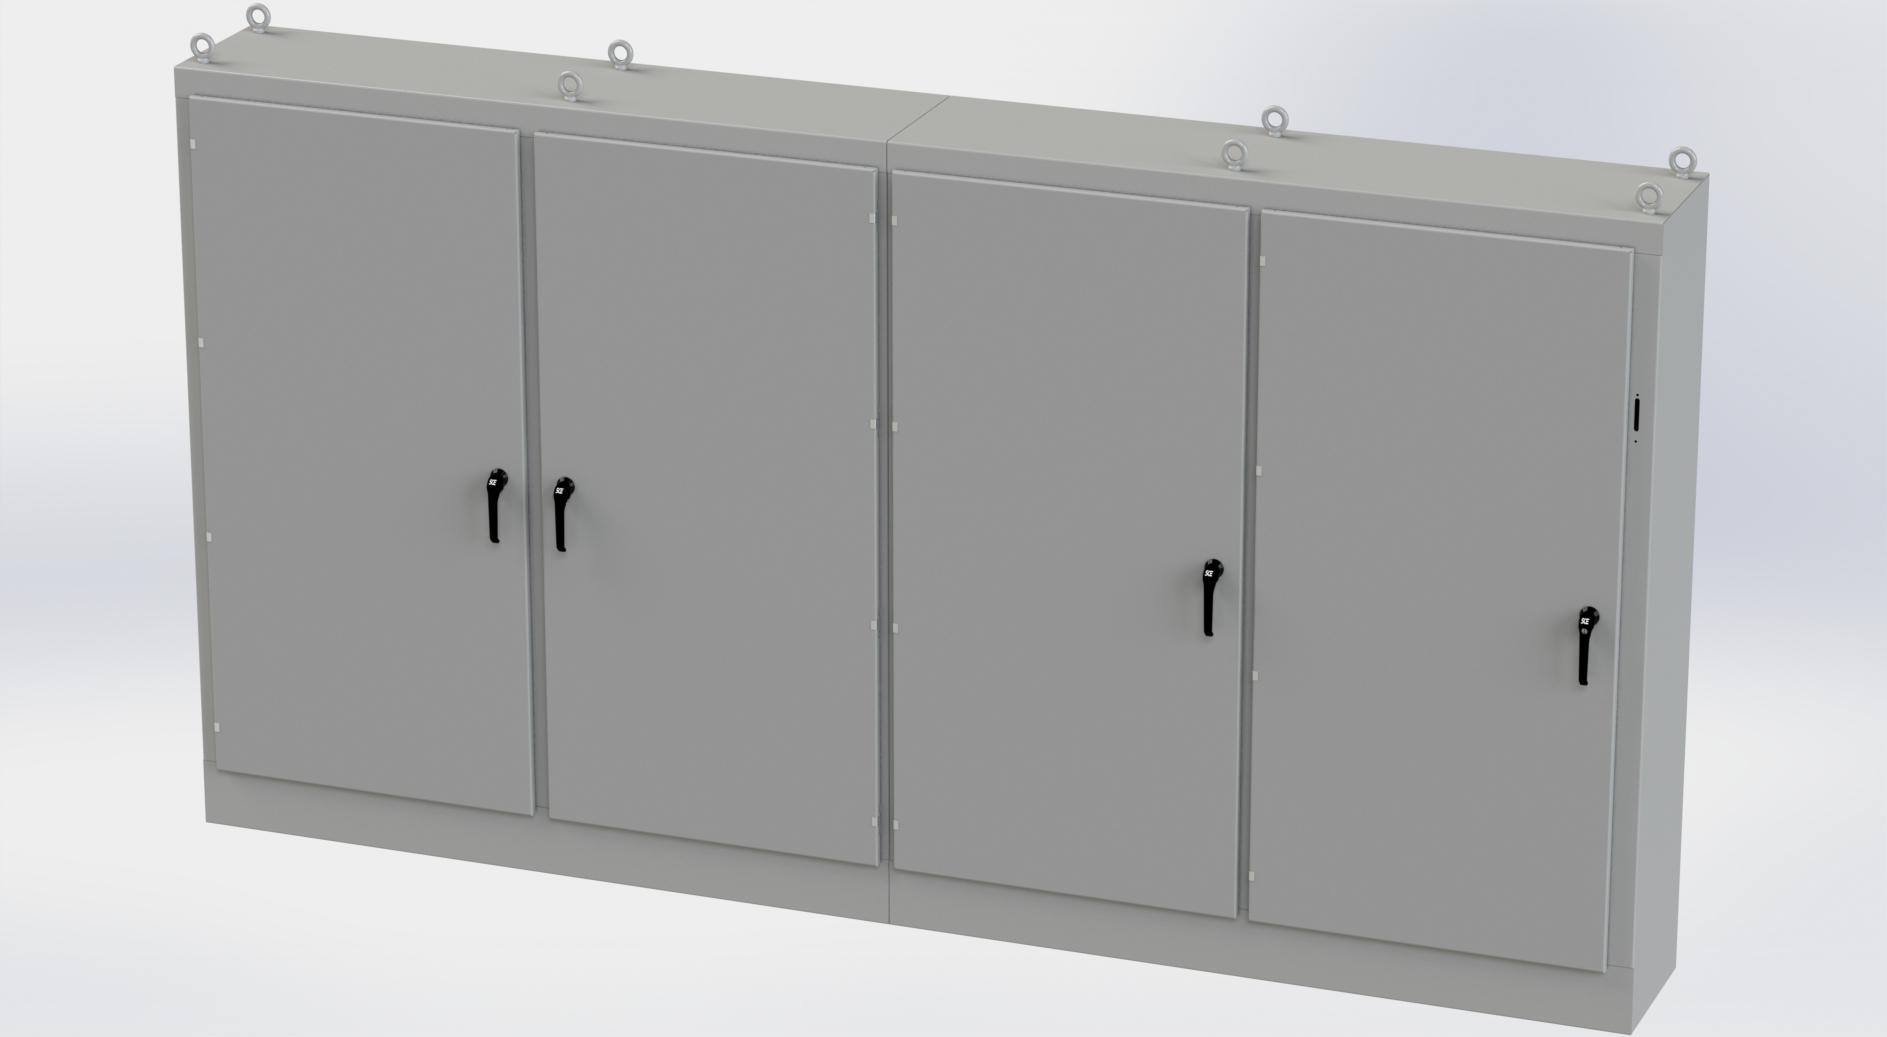 Saginaw Control SCE-84XM4EW18 4DR XM Enclosure, Height:84.00", Width:157.50", Depth:18.00", ANSI-61 gray powder coating inside and out. Subpanels are powder coated white.